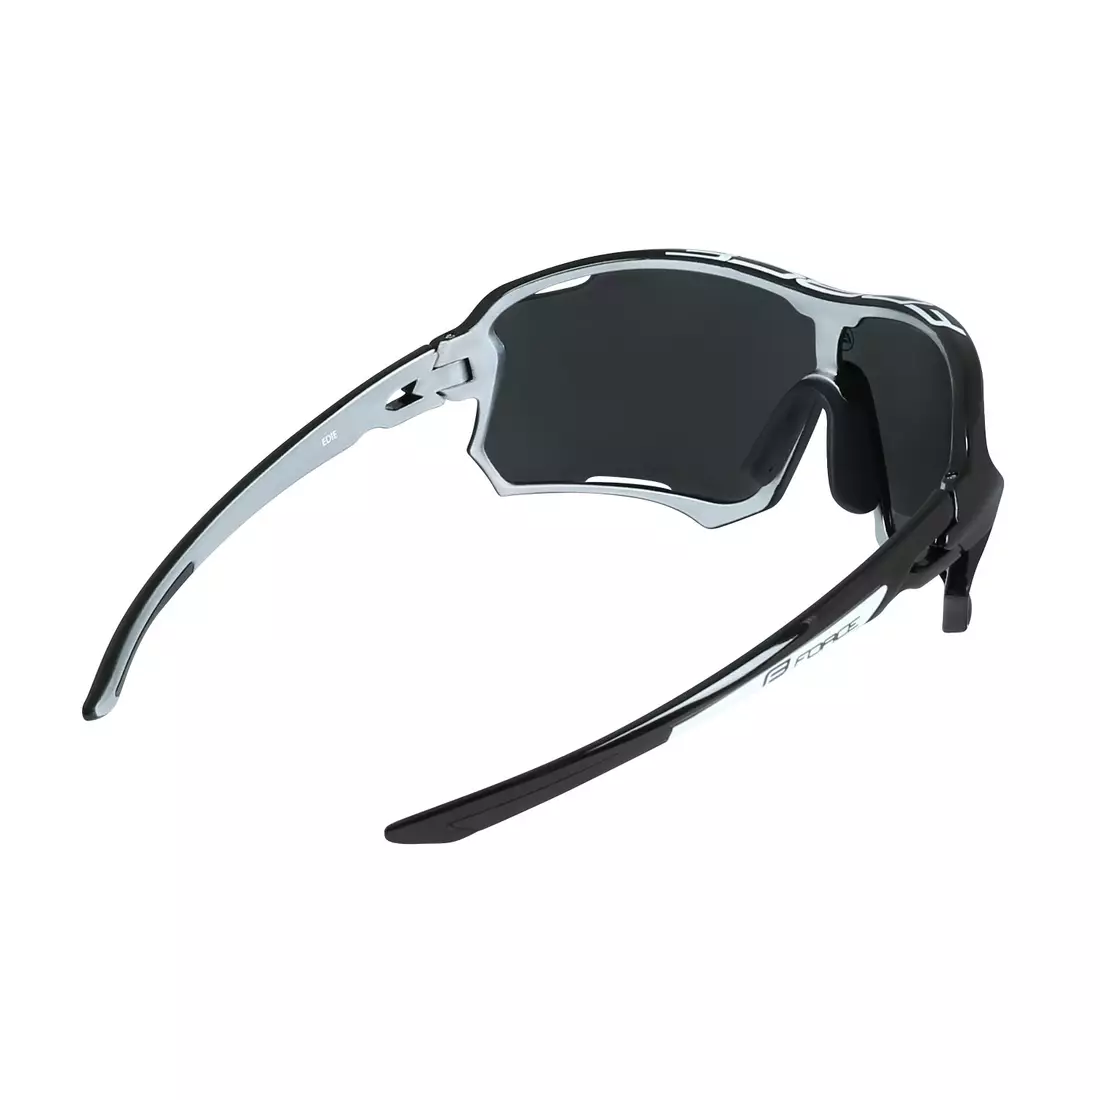 FORCE EDIE Glasses black and gray 91080